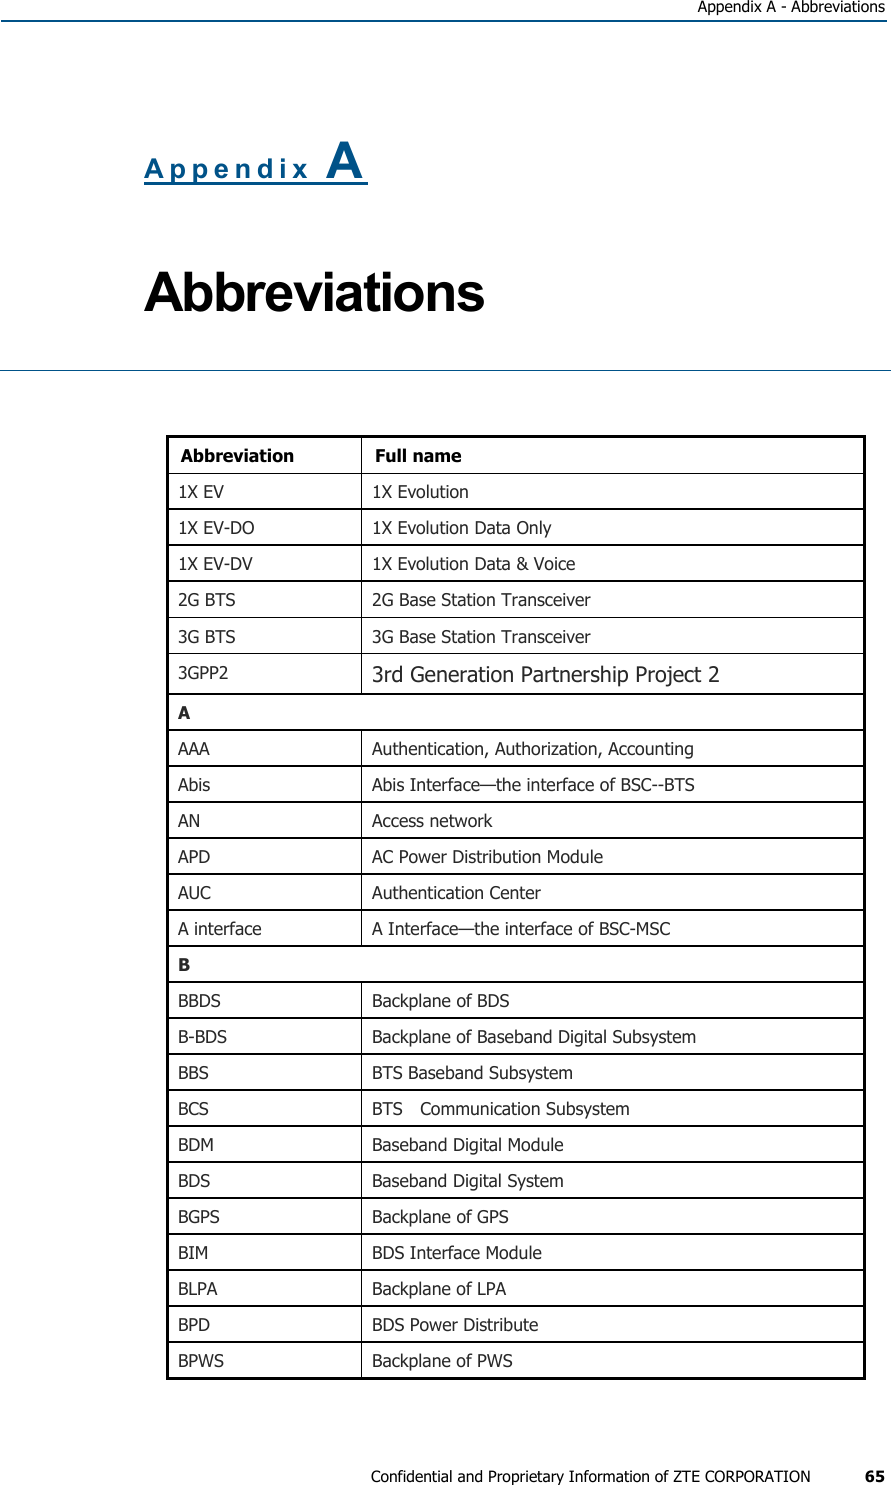   Appendix A - Abbreviations Confidential and Proprietary Information of ZTE CORPORATION 65 Appendix A Abbreviations  Abbreviation Full name 1X EV  1X Evolution 1X EV-DO  1X Evolution Data Only 1X EV-DV  1X Evolution Data &amp; Voice 2G BTS  2G Base Station Transceiver 3G BTS  3G Base Station Transceiver 3GPP2  3rd Generation Partnership Project 2 A AAA Authentication, Authorization, Accounting Abis  Abis Interface—the interface of BSC--BTS AN Access network APD  AC Power Distribution Module AUC Authentication Center A interface   A Interface—the interface of BSC-MSC B BBDS  Backplane of BDS B-BDS  Backplane of Baseband Digital Subsystem BBS  BTS Baseband Subsystem BCS BTS Communication Subsystem BDM Baseband Digital Module BDS Baseband Digital System BGPS  Backplane of GPS BIM BDS Interface Module BLPA  Backplane of LPA BPD  BDS Power Distribute BPWS  Backplane of PWS 